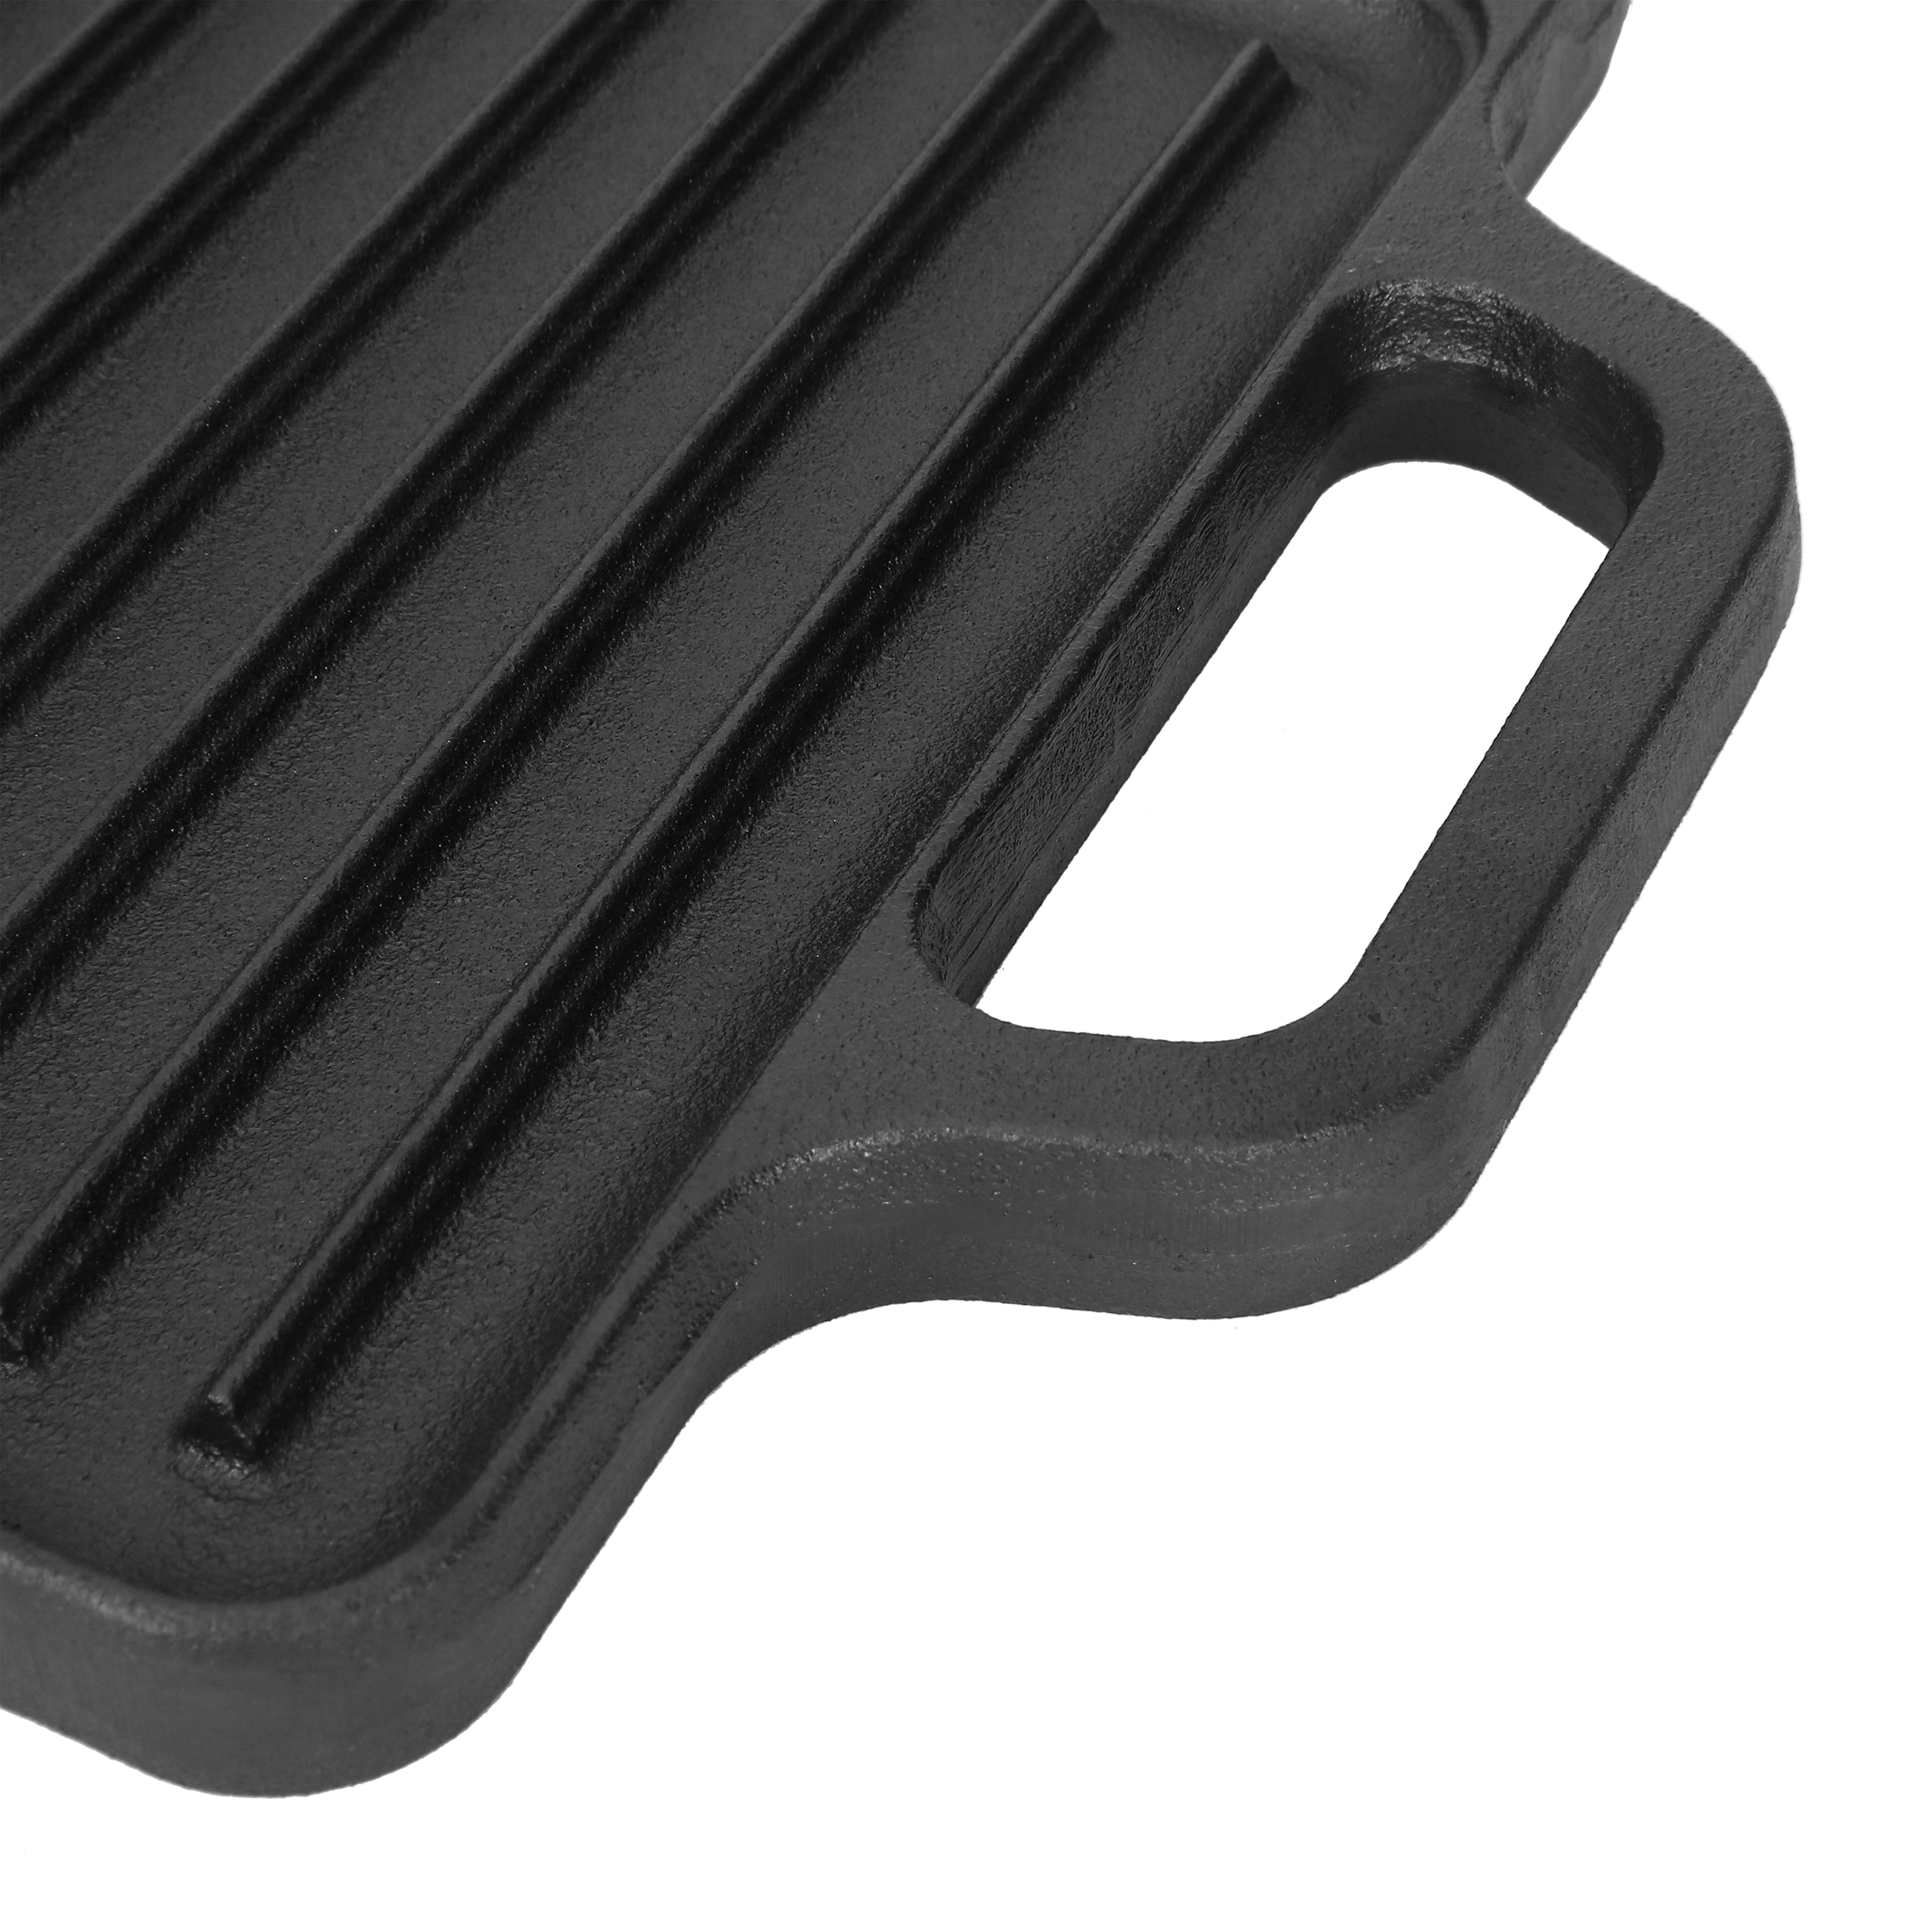 Ozark Trail 9 in Cast Iron Griddle (Reversible, 16.5 x 9 in) - image 2 of 2